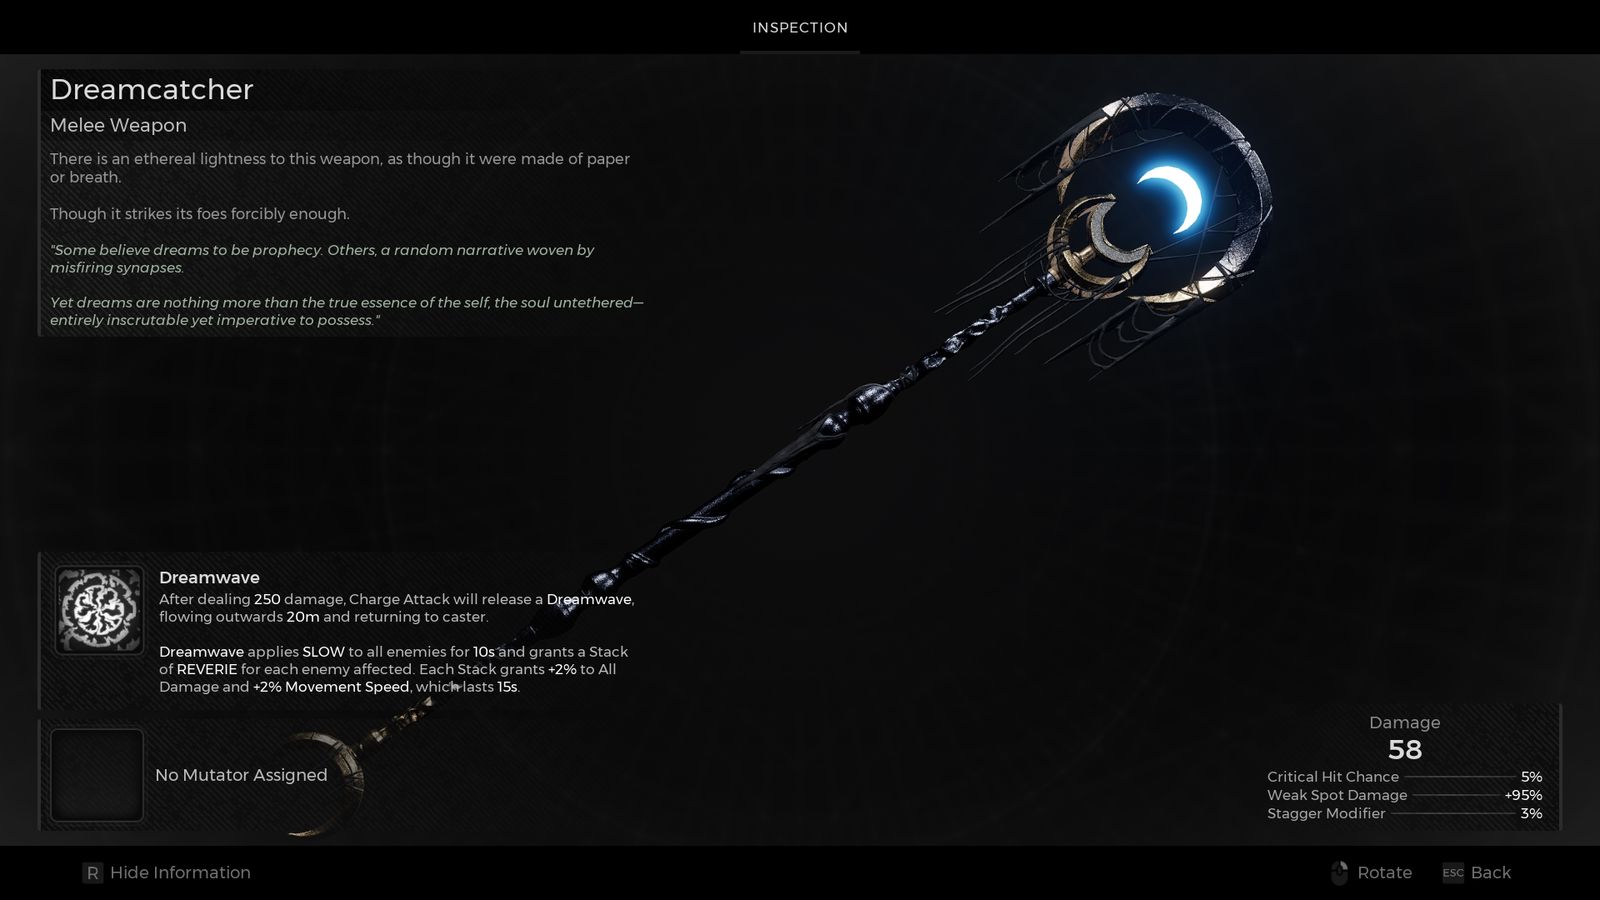 The Dreamcatcher in Remnant 2.